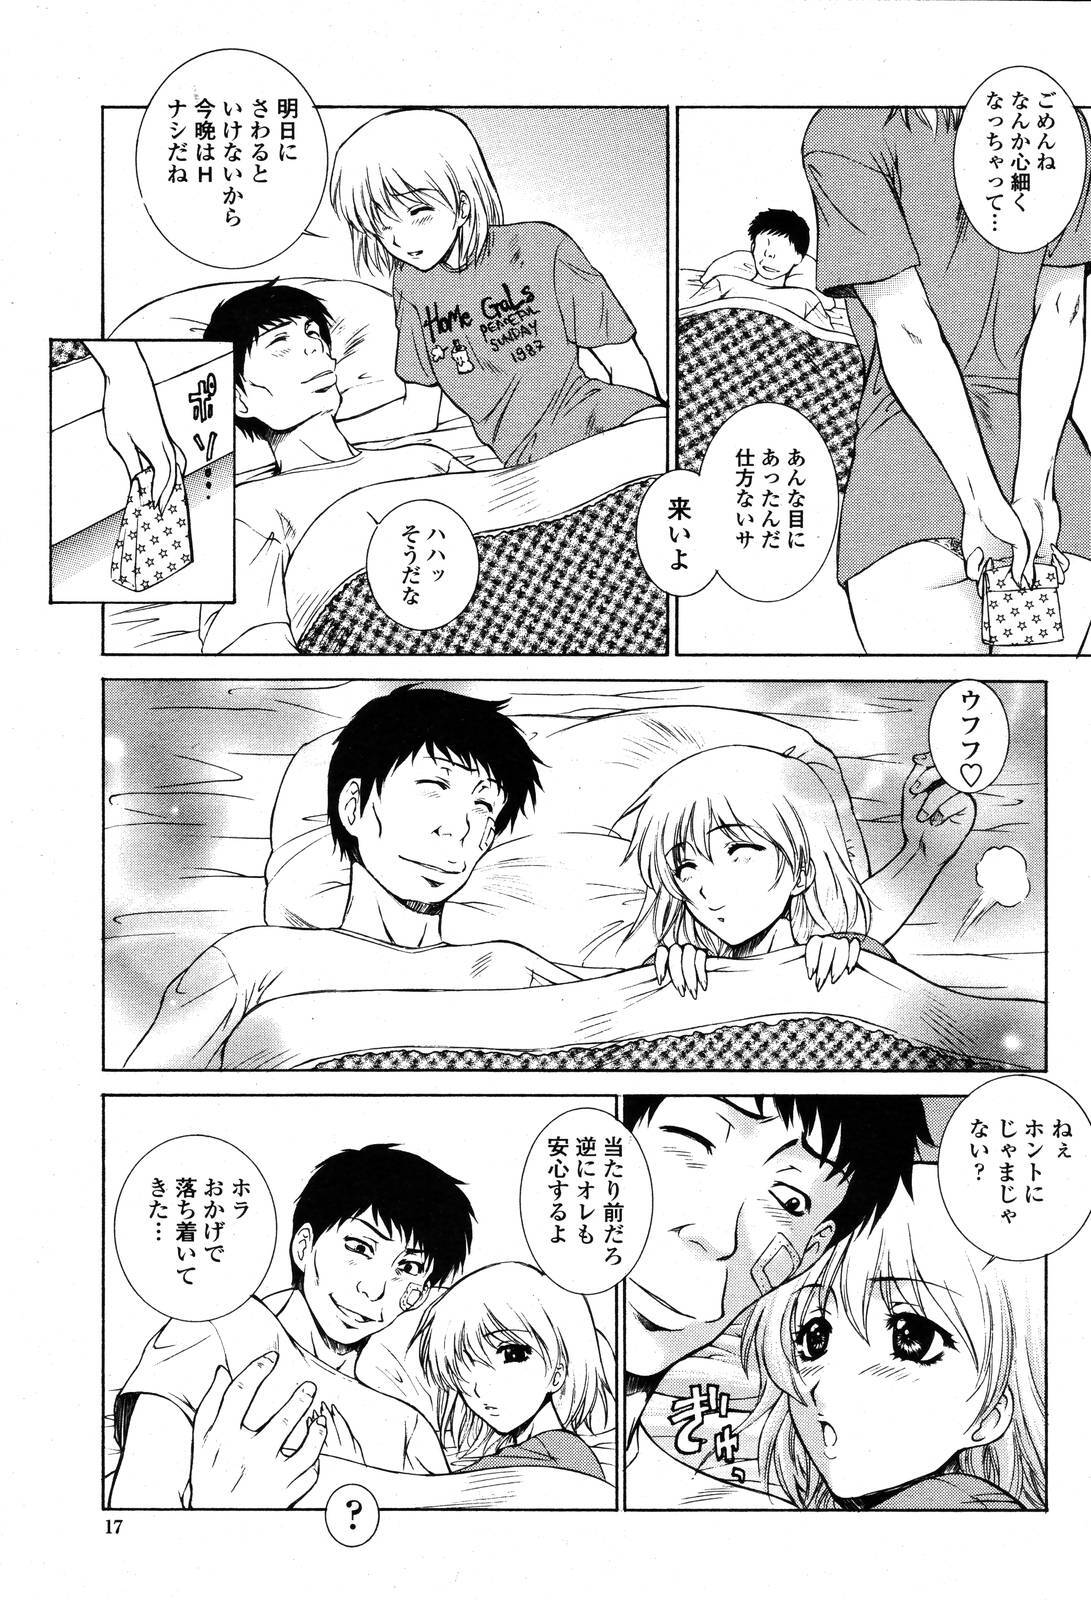 COMIC Momohime 2006-10 page 19 full